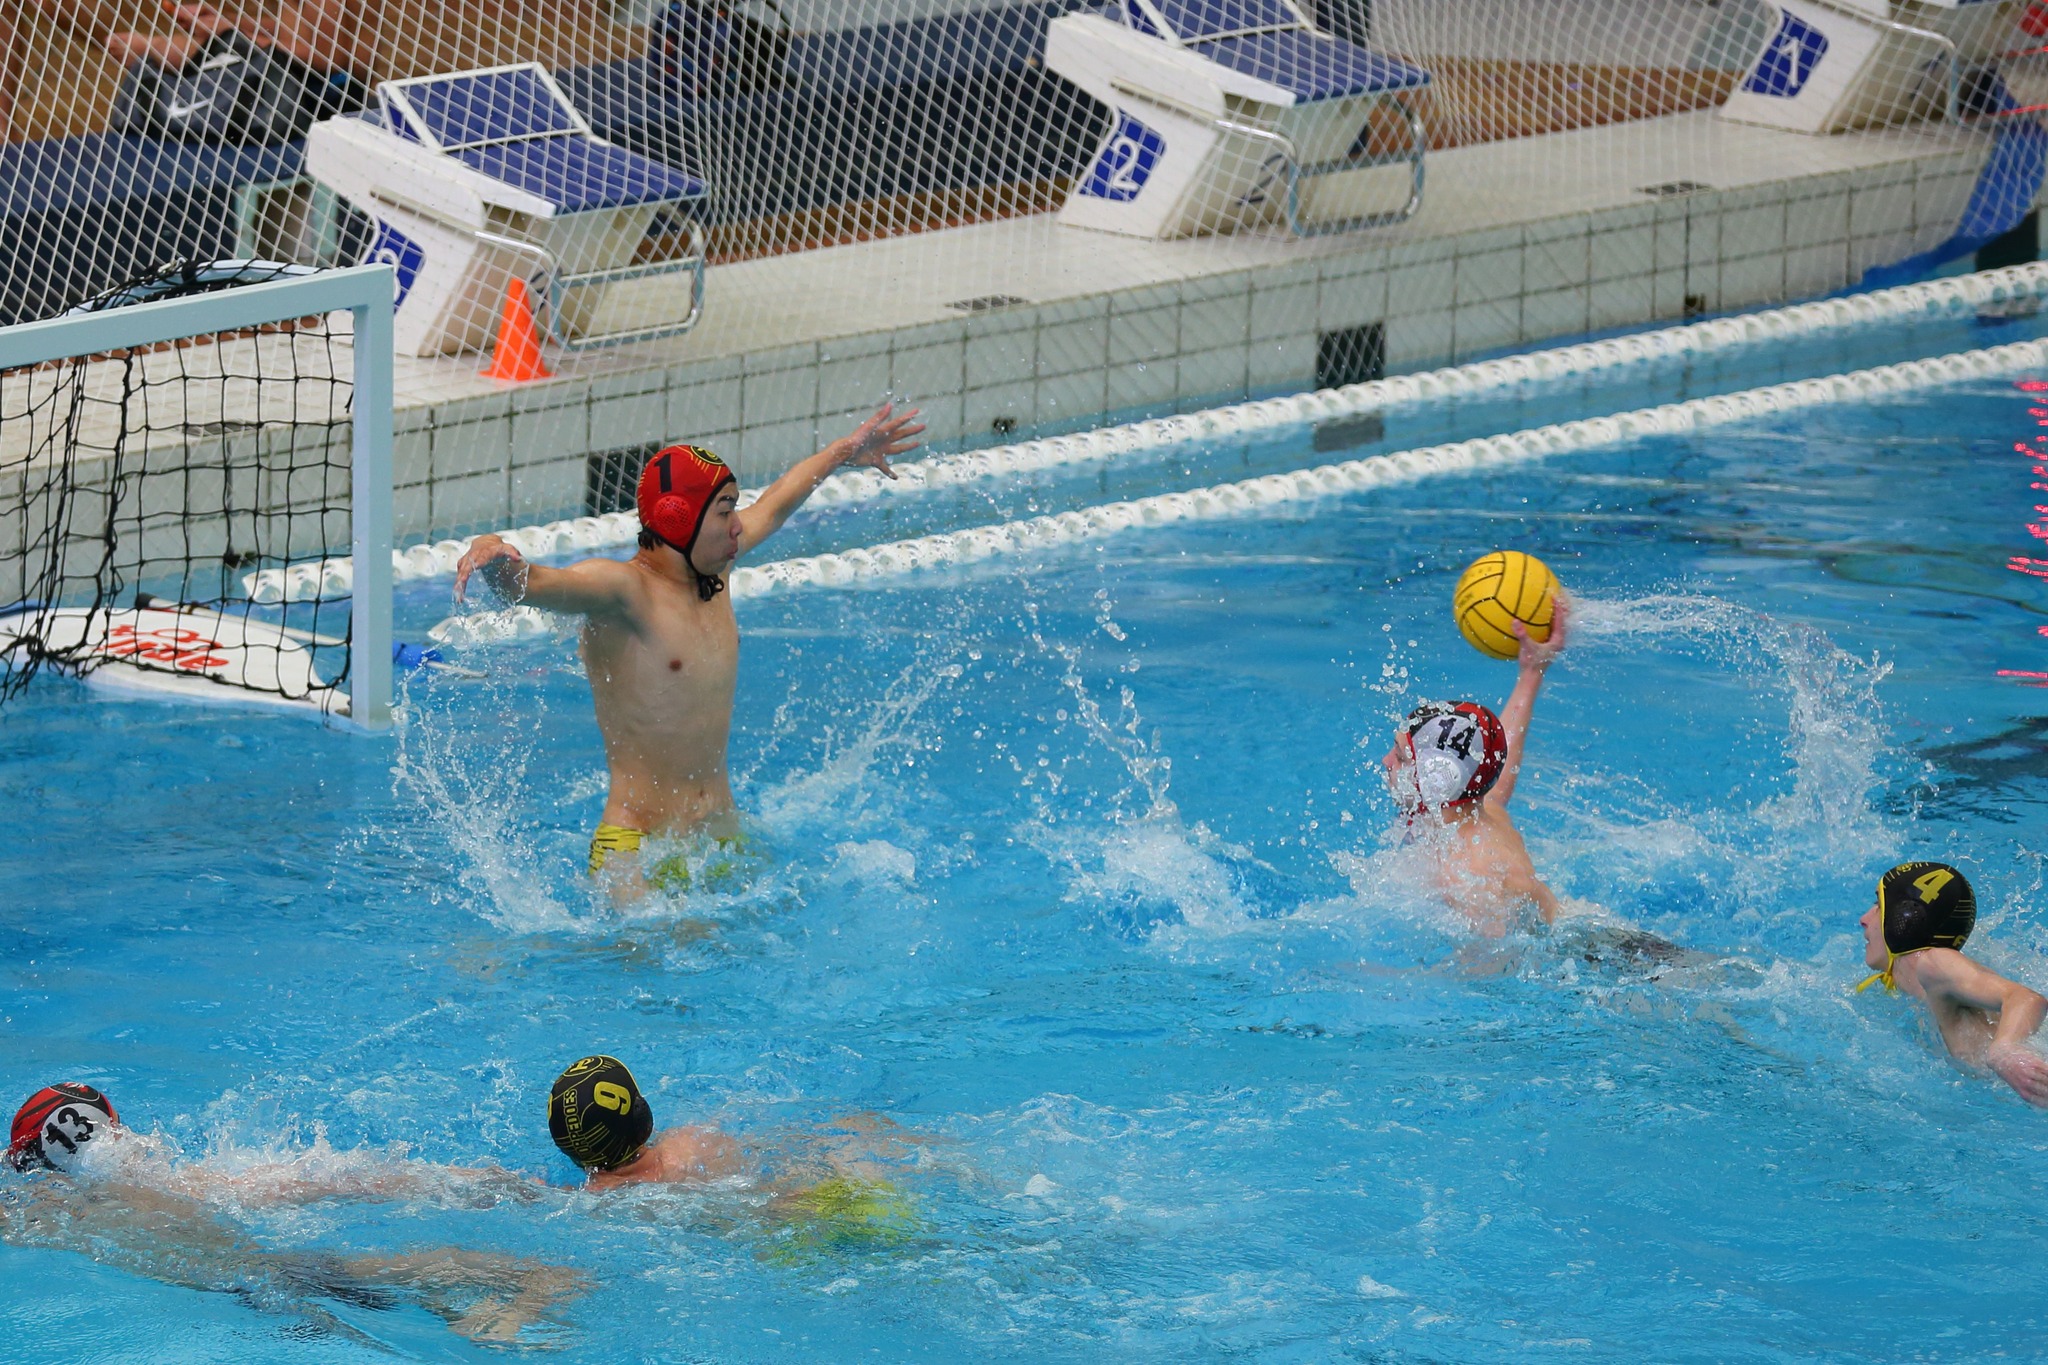 Water Polo Canada U15 NCL Western Championsips. Photo Credit: Water Polo Canada